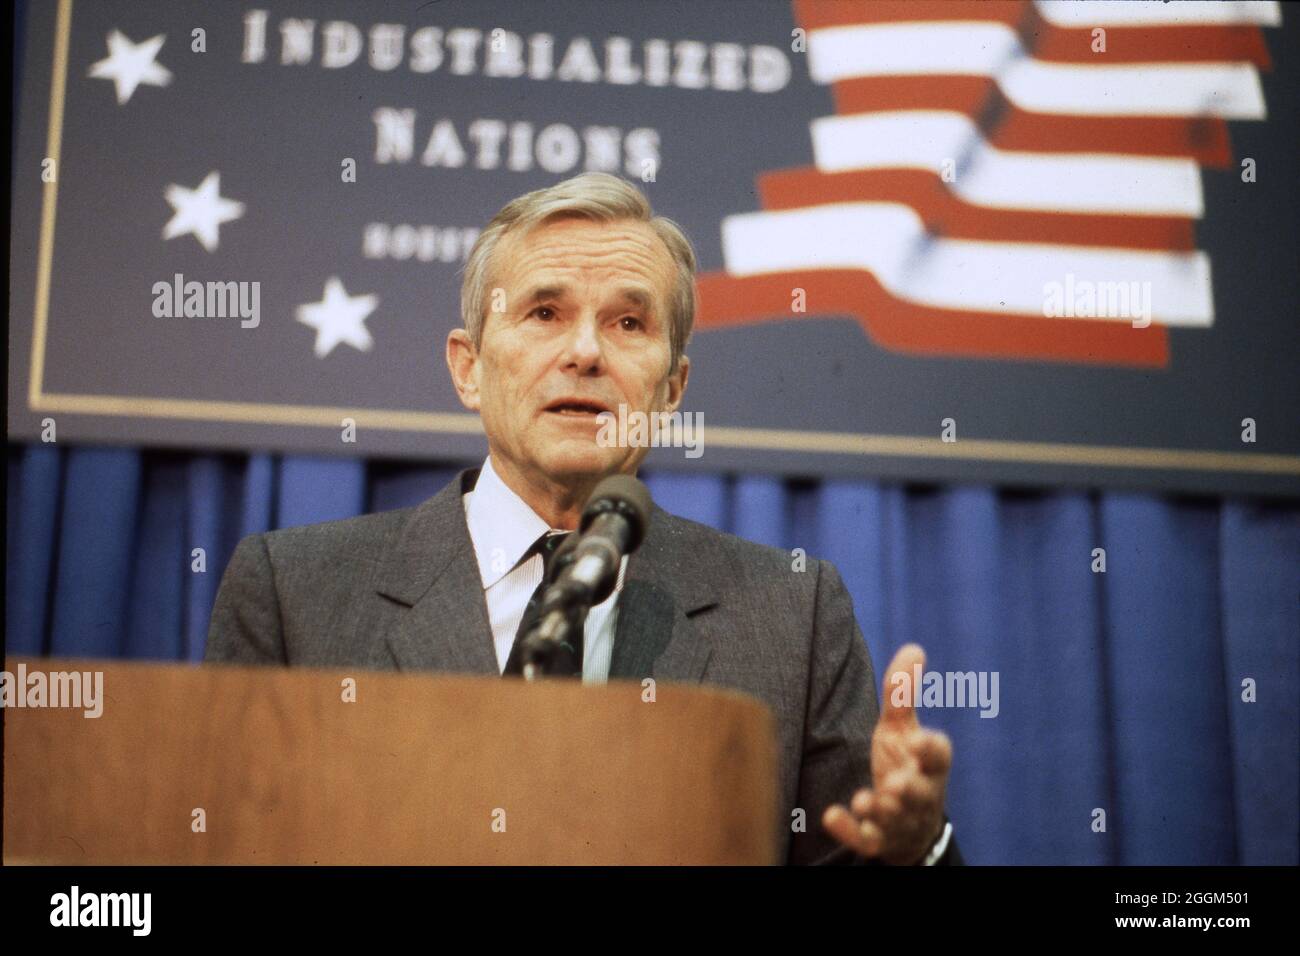 Houston Texas USA, July 1990: U.S. Treasury Secretary Nicholas Brady  speaks to world leaders at the Houston Economic Summit of Industrialized Nations. President George H. W. Bush hosted the event, also called the G7 Economic Summit. ©Bob Daemmrich Stock Photo